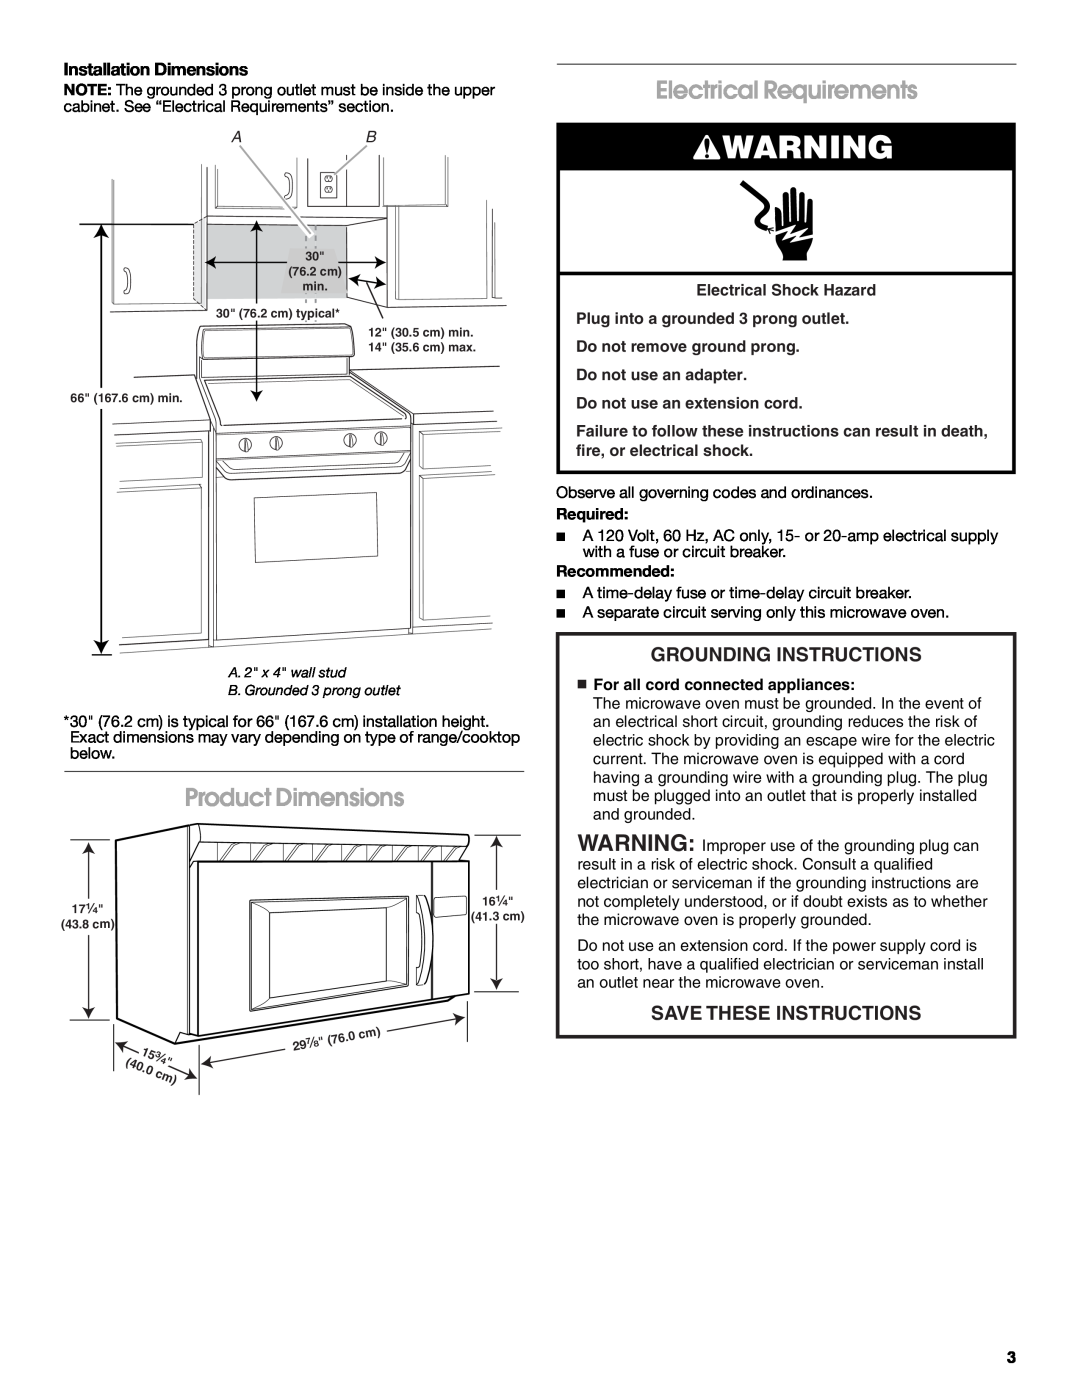 Maytag W10191953A Product Dimensions, Electrical Requirements, Installation Dimensions, Electrical Shock Hazard, Required 